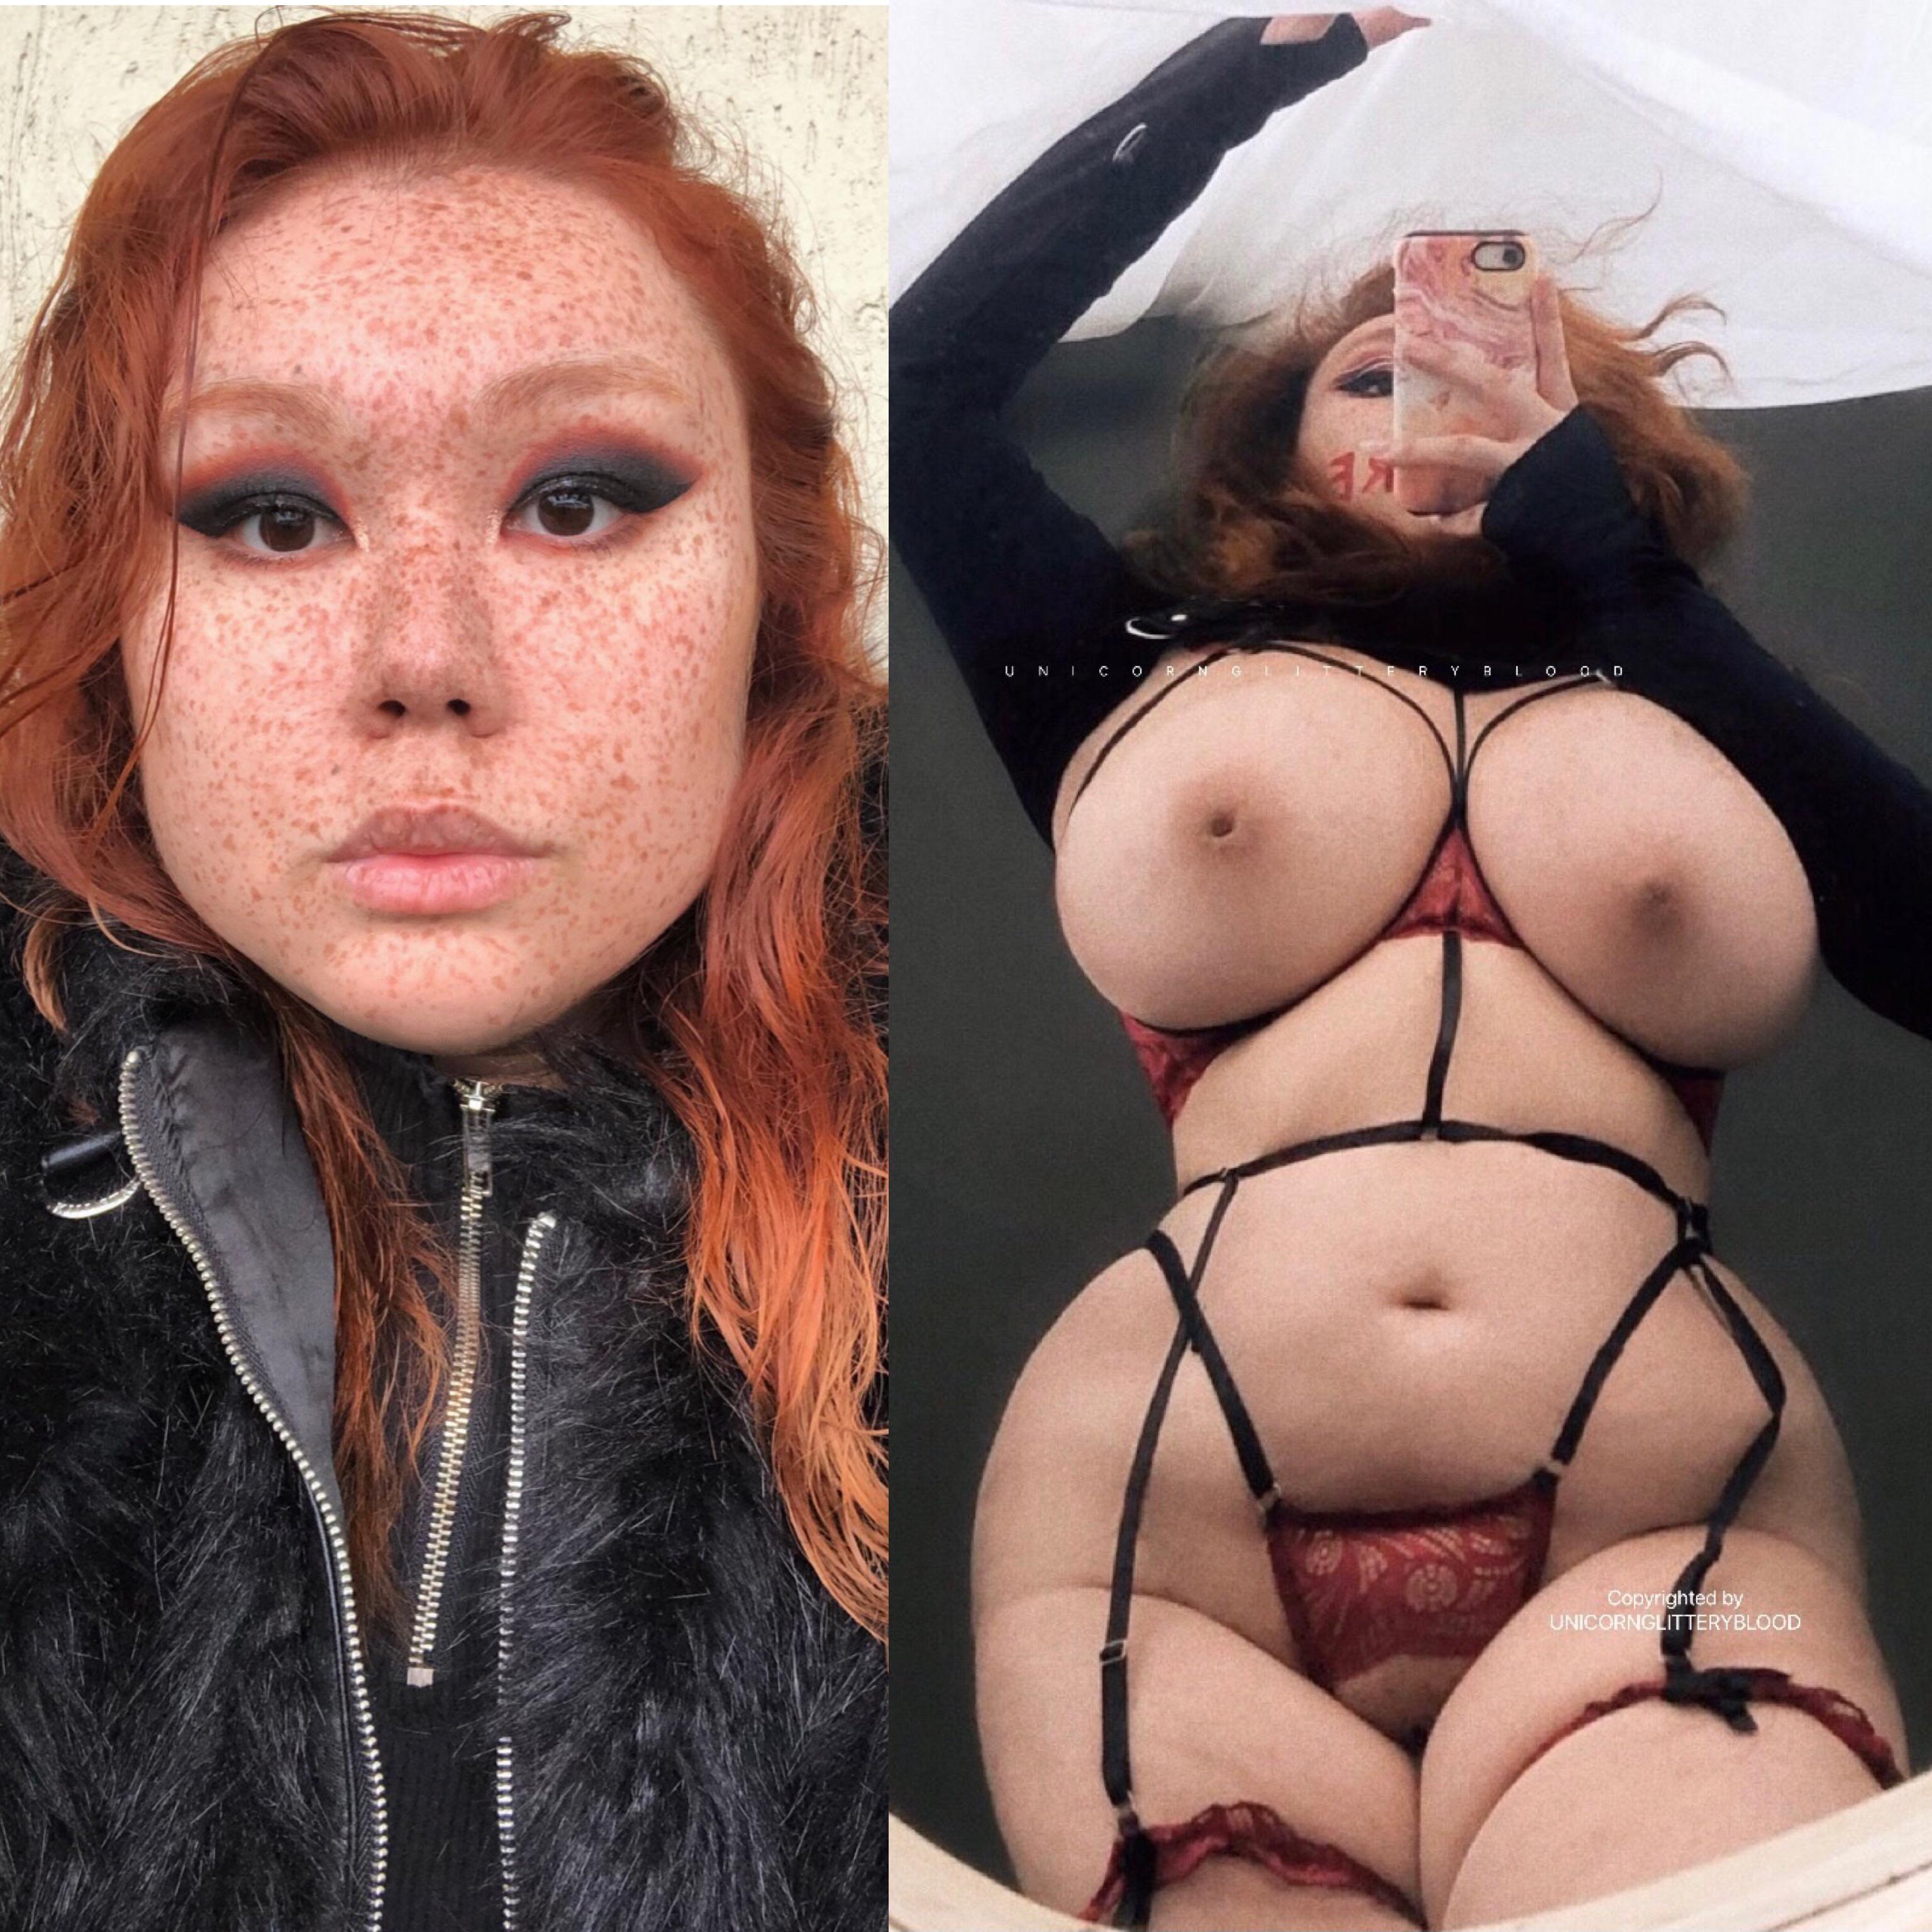 [OC] my face vs my body! Would you fuck me? Post By Xxx Sexy Unicornglitteryblood on gothsluts